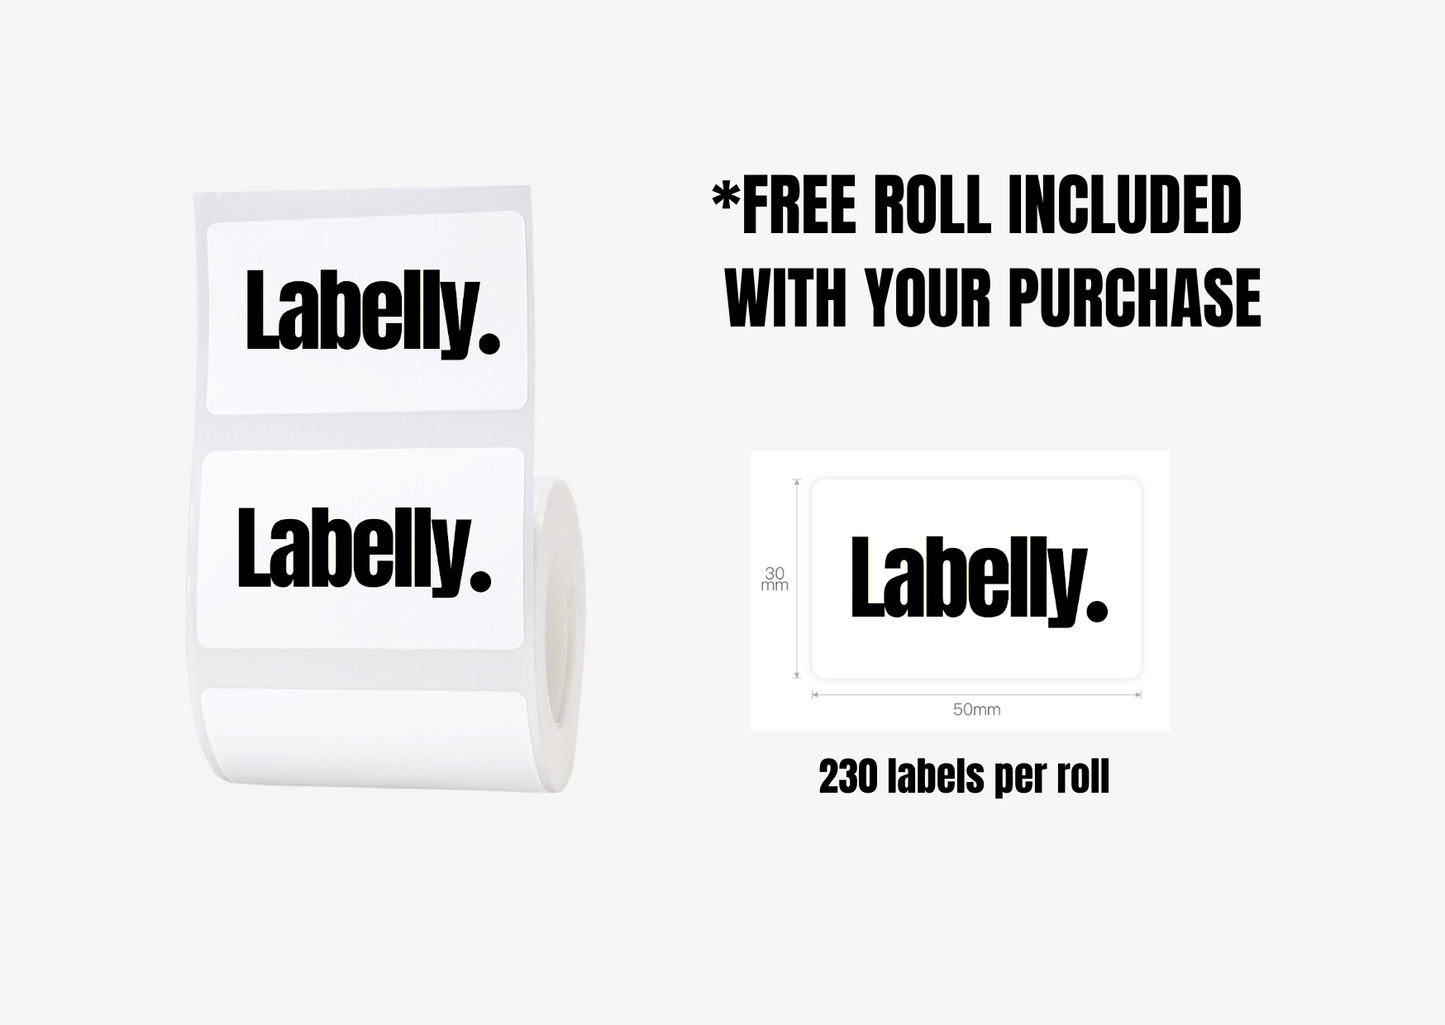 The Red Labelly Machine + Free Roll of 230 Labels